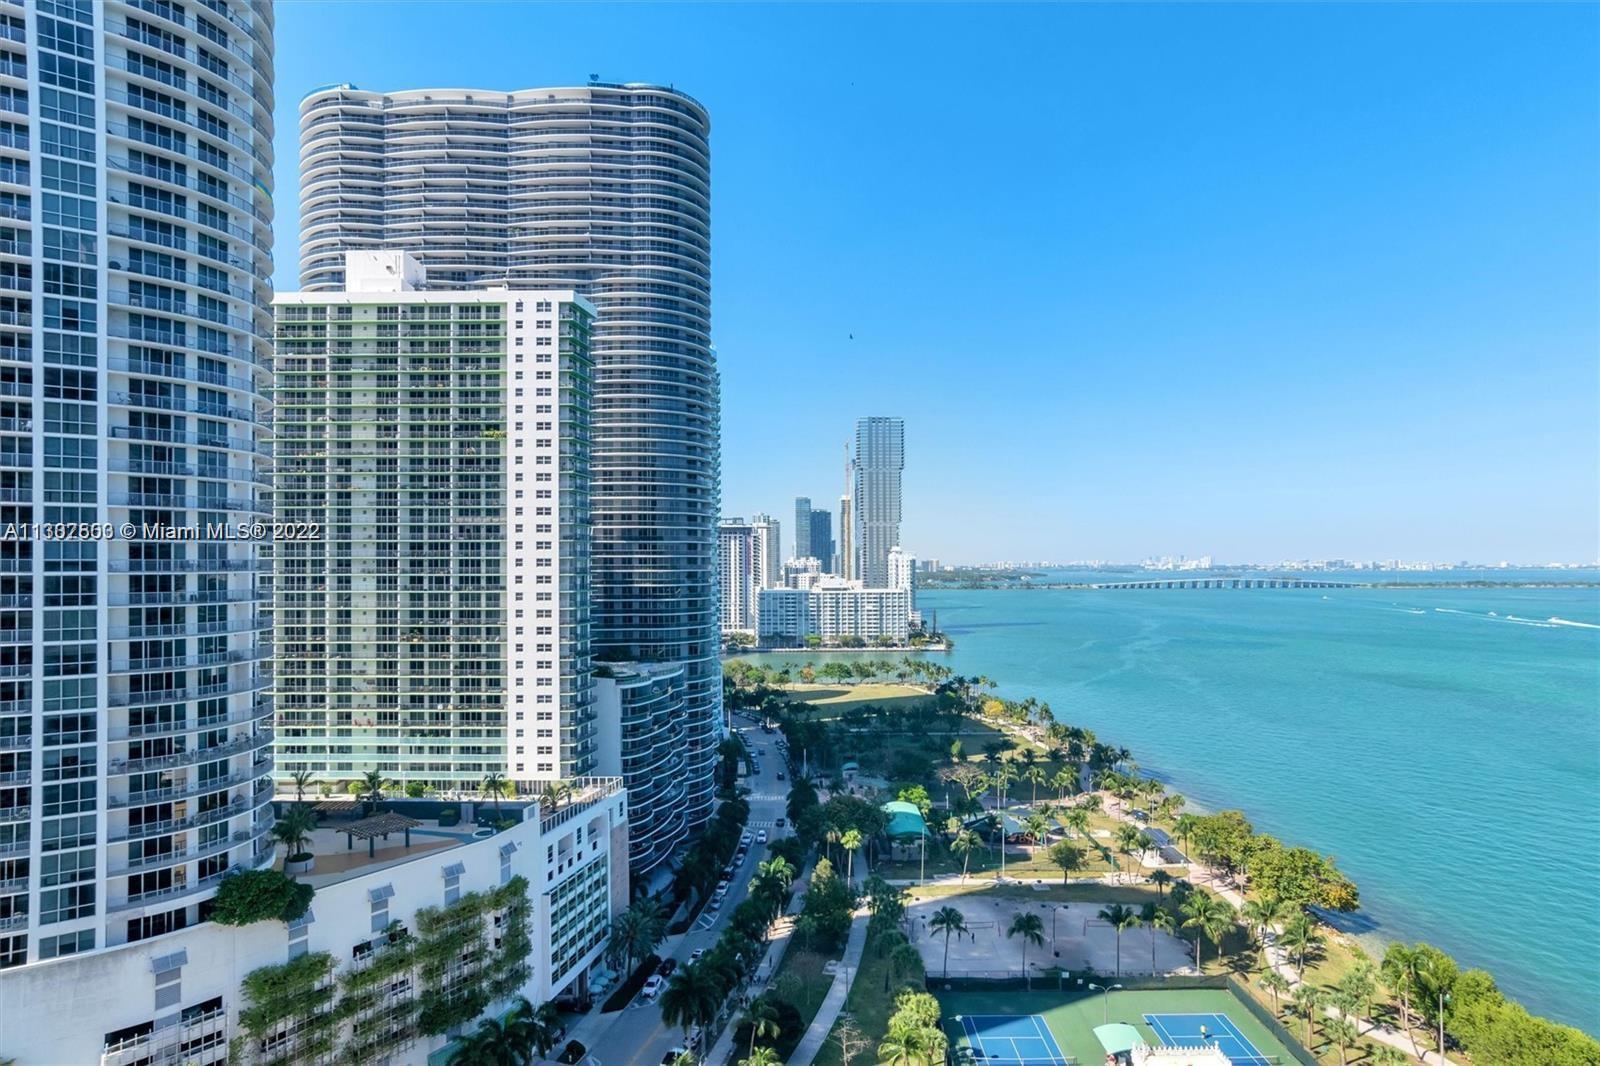 currently rented mo-mo; Renovated 2/2 including High Impact windows with Great views of Biscayne Bay